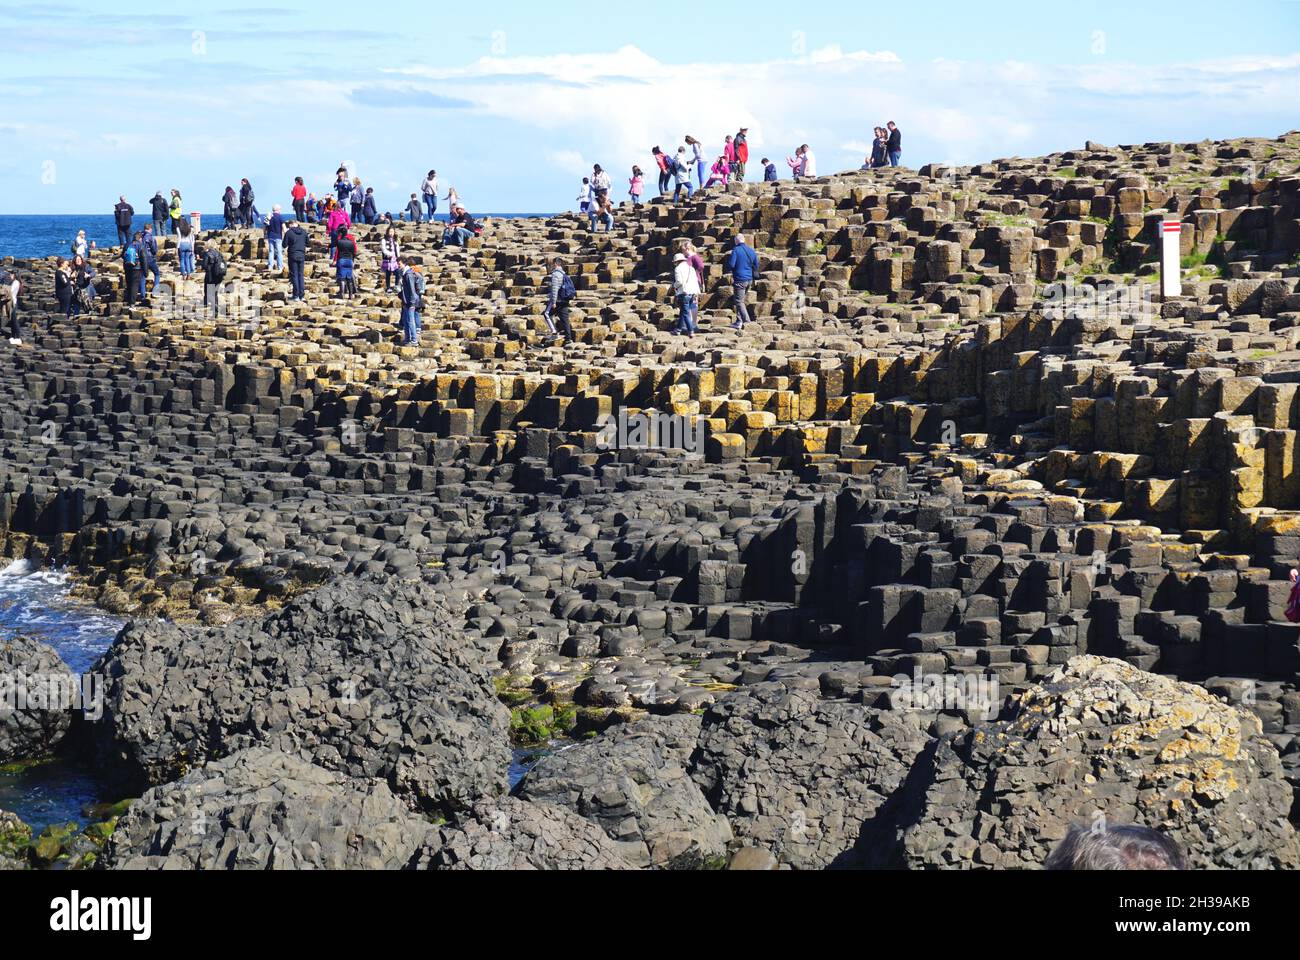 Visitors climb on natural volcanic rock formations at the Giant’s Causeway, located at the edge of the sea on the north coast of Northern Ireland. Stock Photo